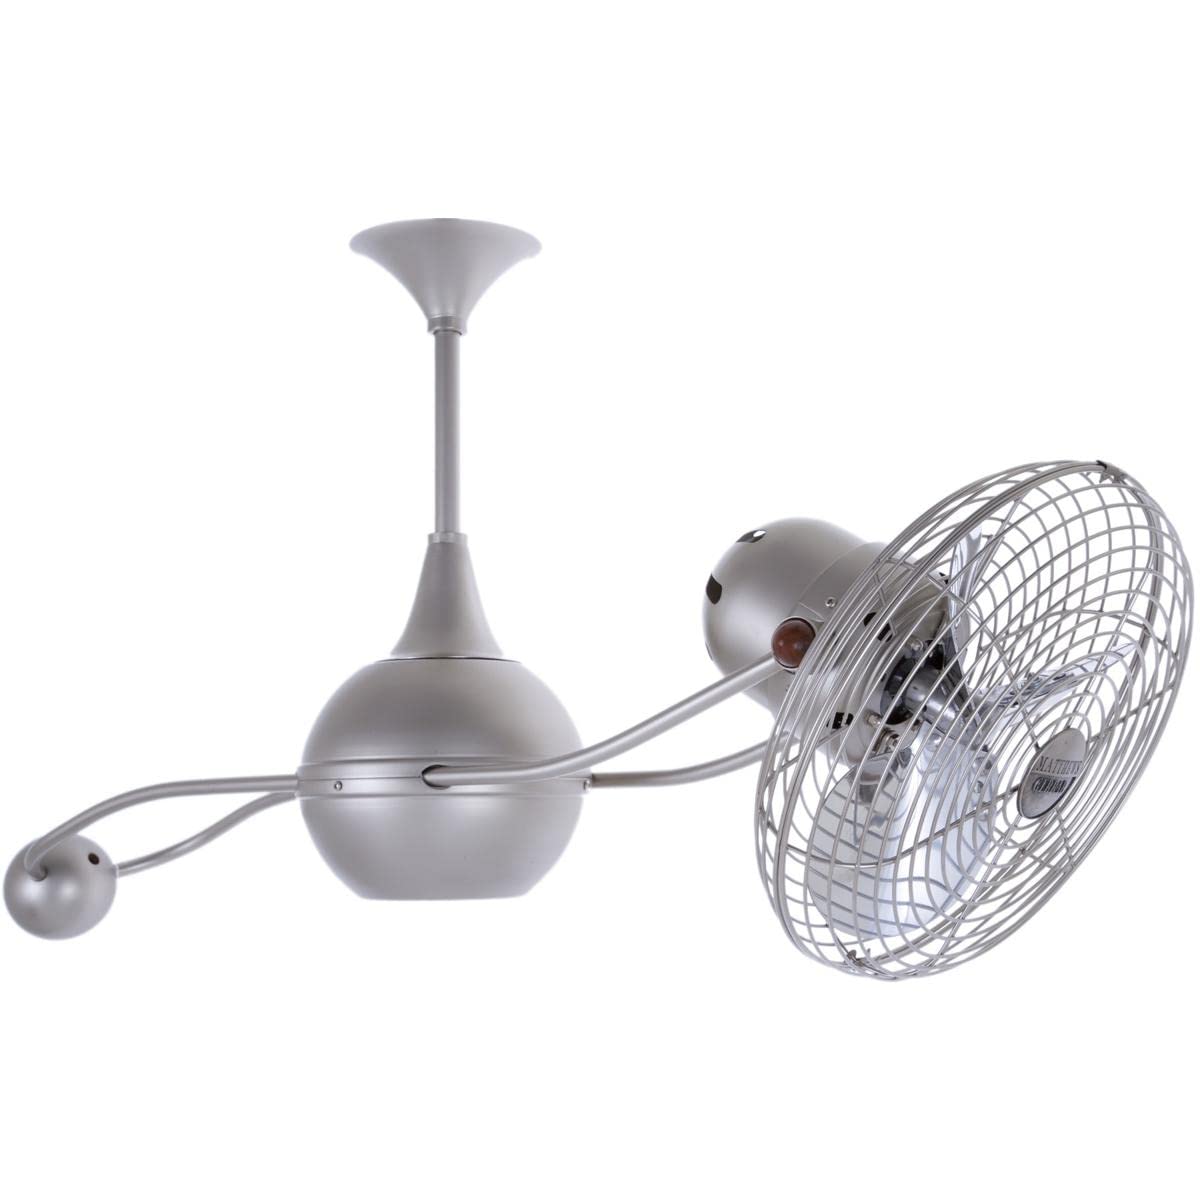 Matthews Fan B2K-CR-MTL-Damp Brisa 360° counterweight rotational ceiling fan in Polished Chrome finish with metal blade for damp locations.